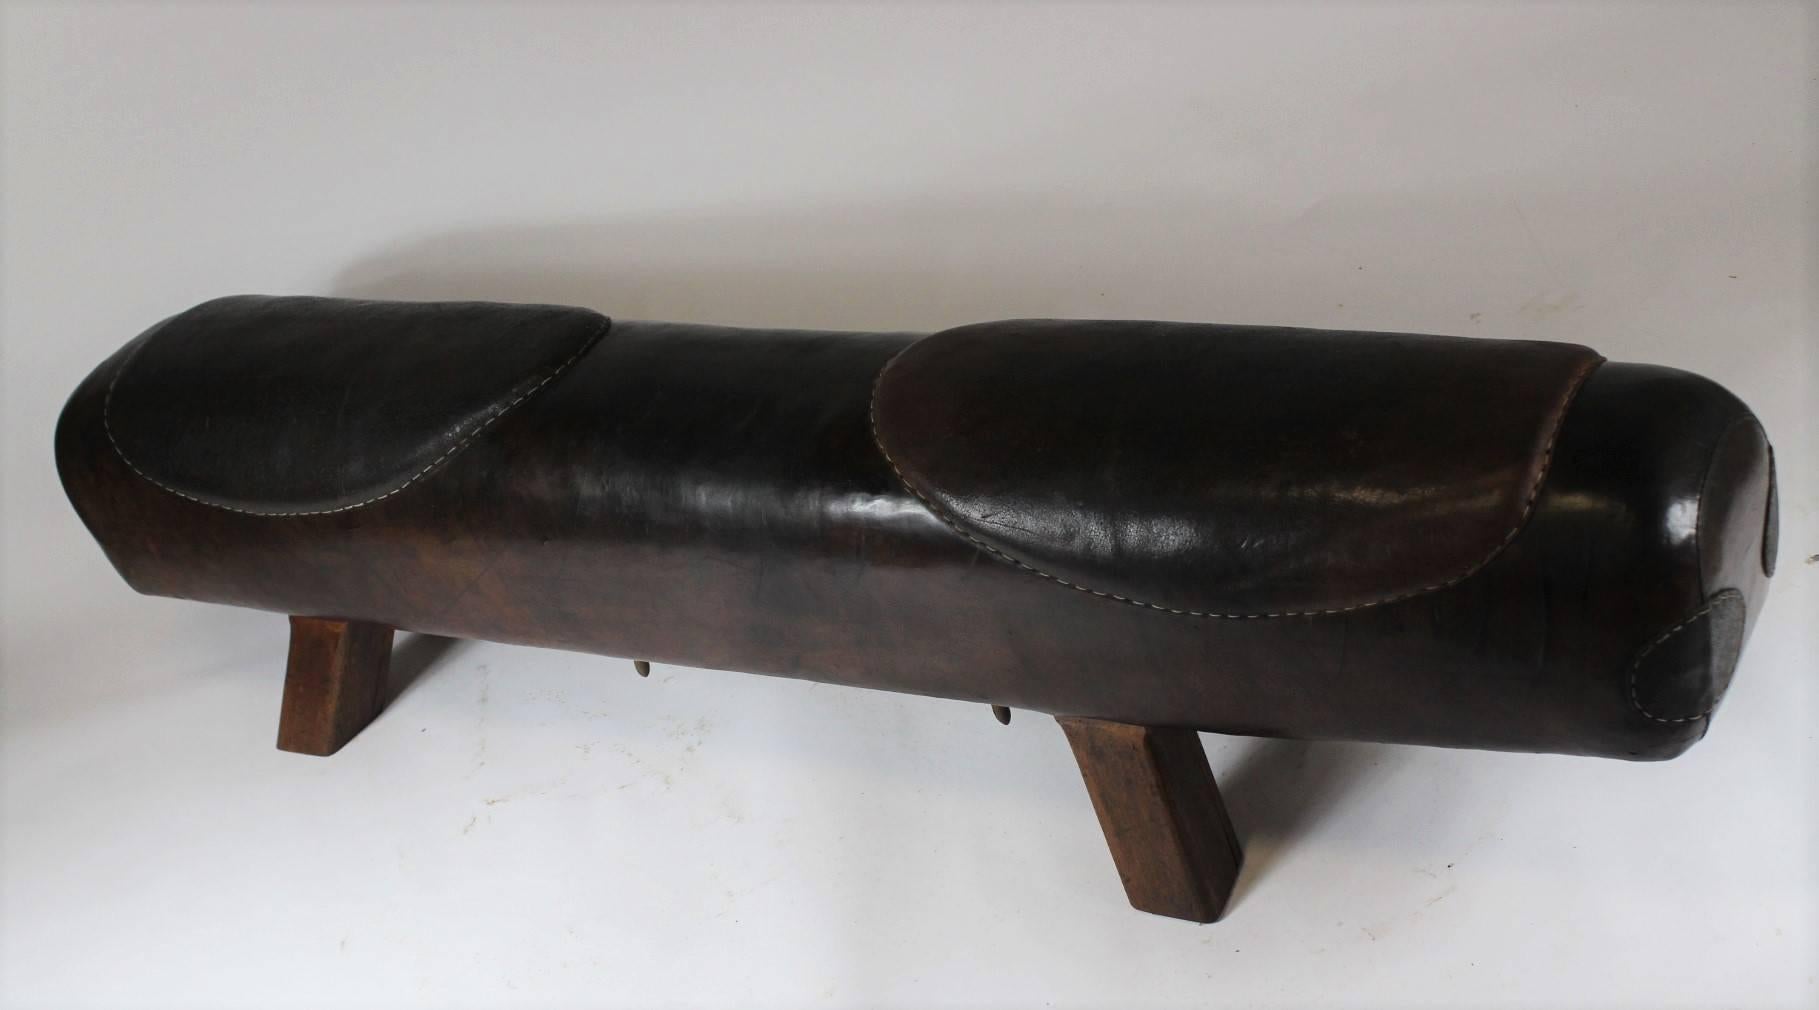 Leather gym pommel horse from the 1940s with two leather patches - seats. Thick leather, nice patina.